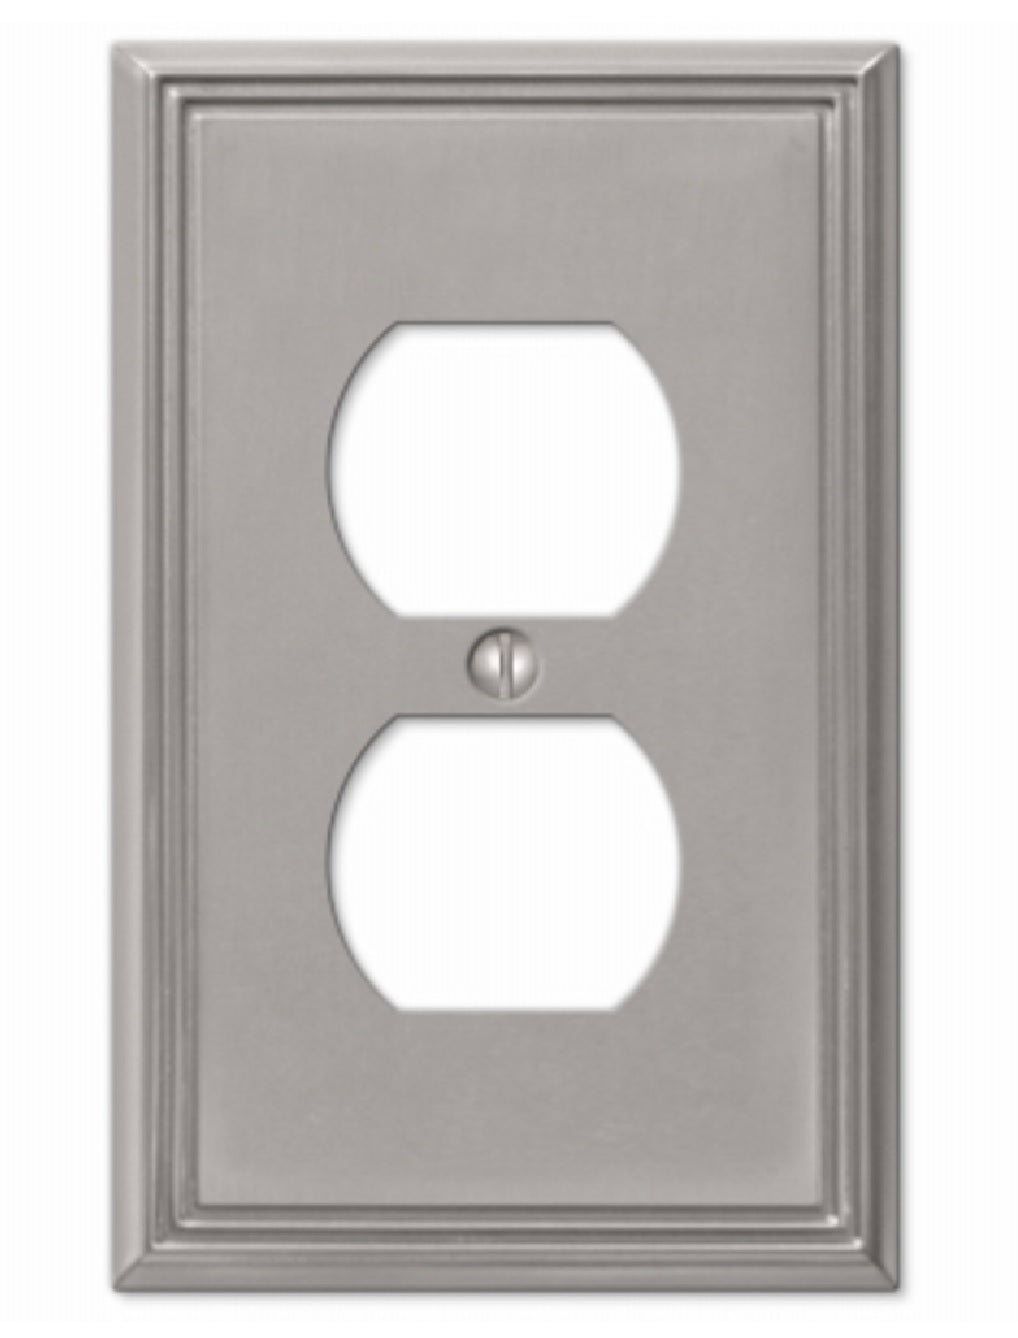 Amerelle 77DBN 1 Toggle & 1 Duplex Wall Plate, Brushed Nickel